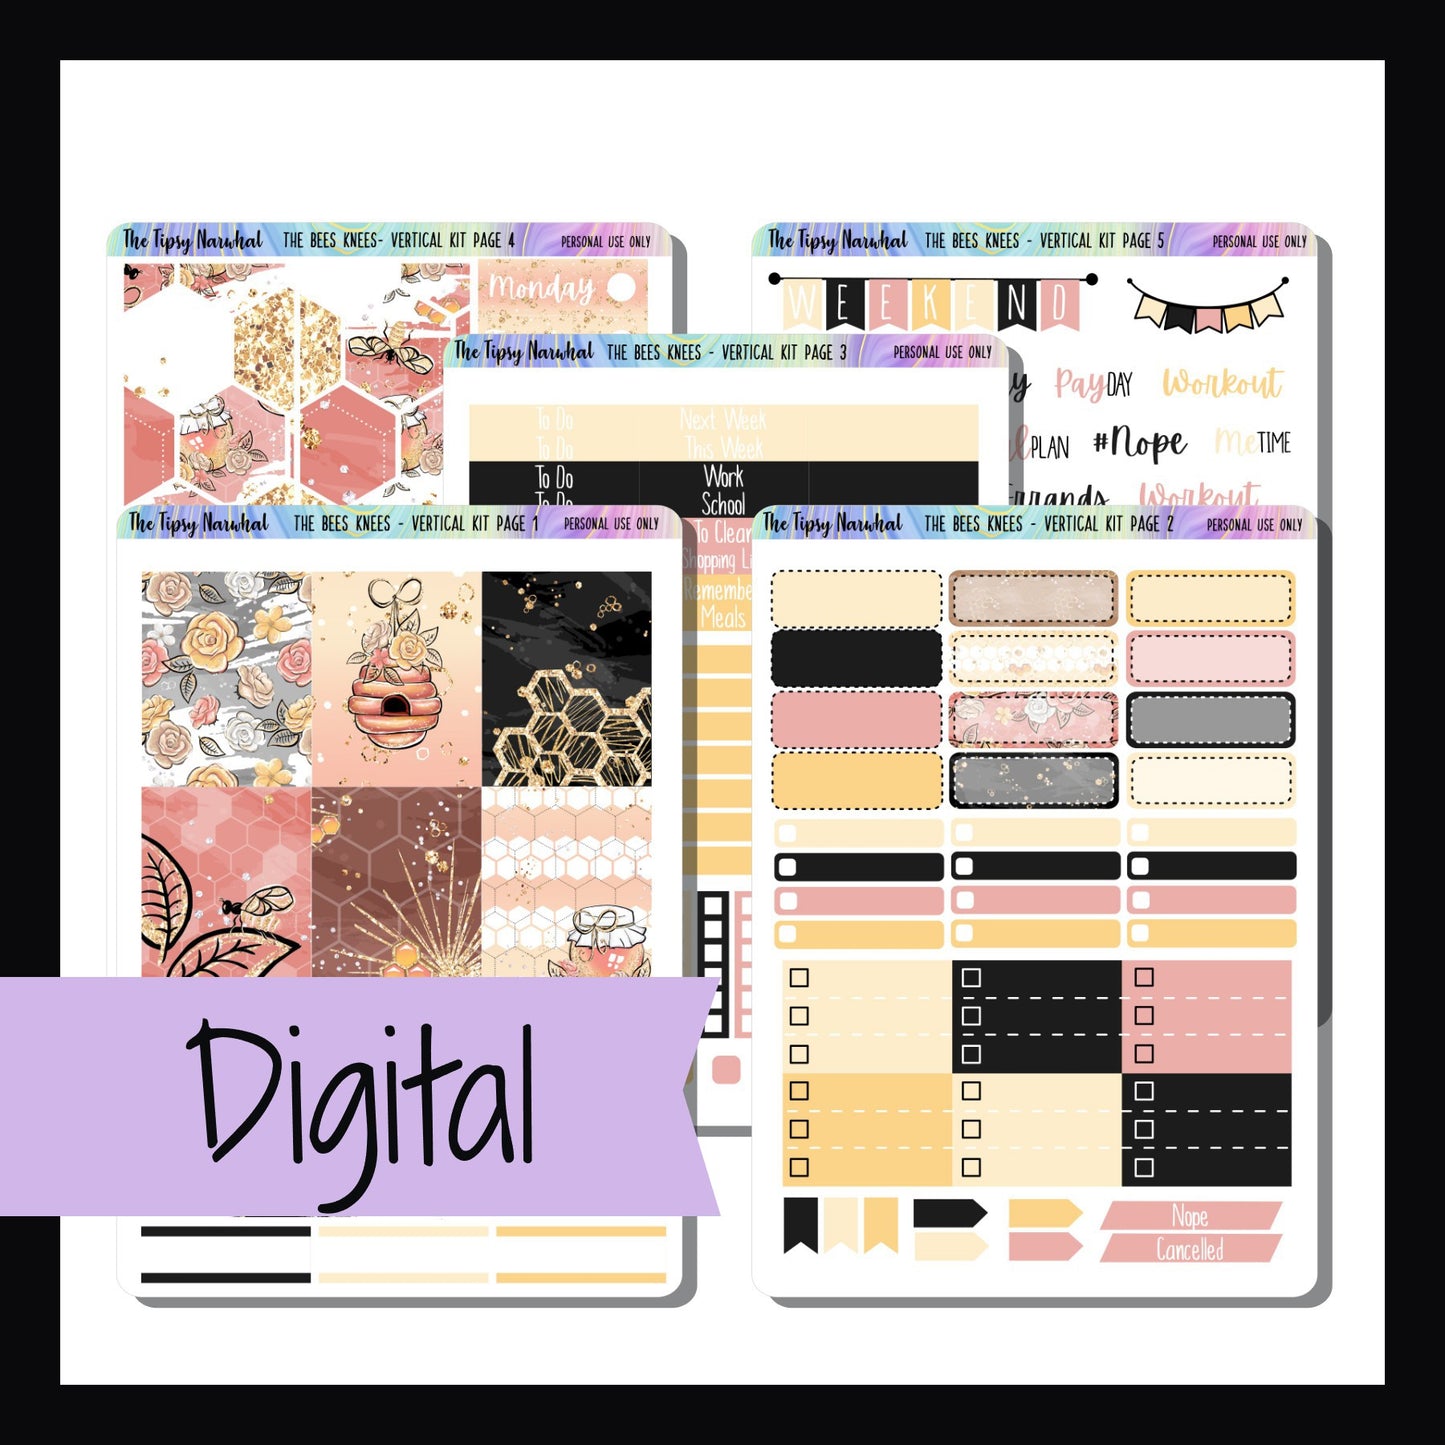 Digital The Bees Knees Vertical Kit is a digital printable version of The Bees Knees Vertical Kit. It is a 5 page sticker kit featuring bees, florals and honey in a beautiful pink, yellow with black color palette. 